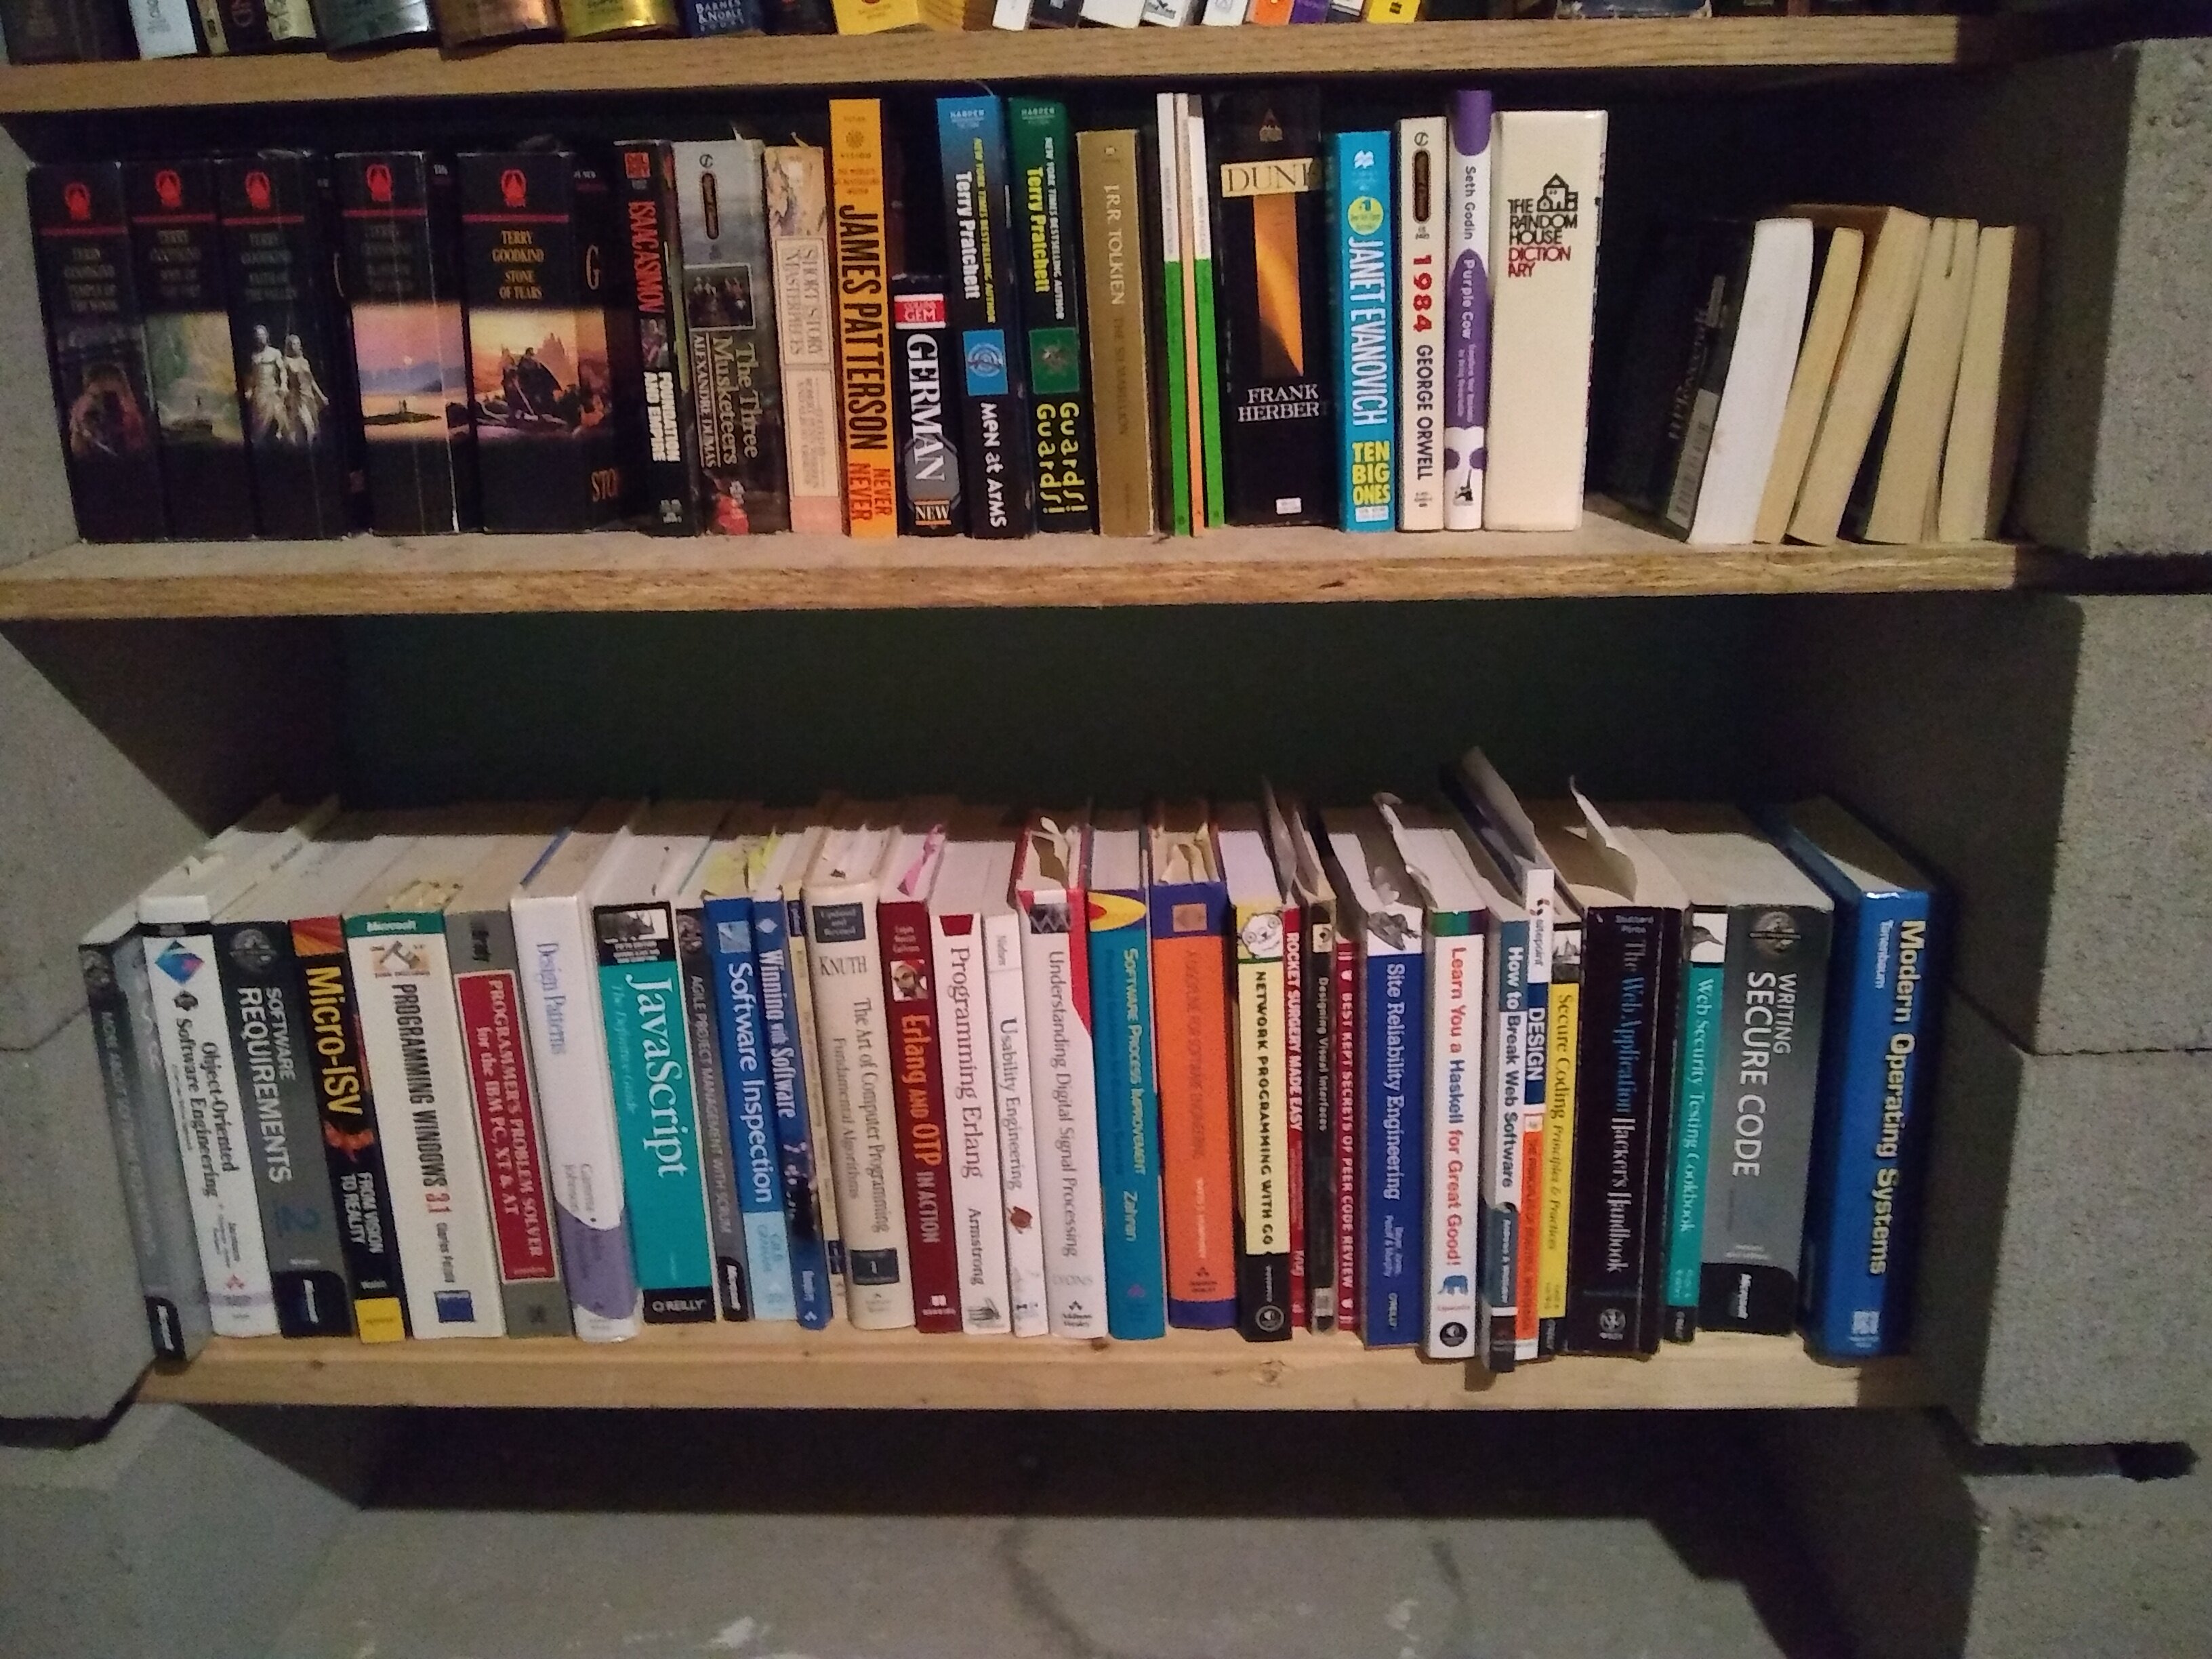 A slice of my library, including the “temporary” shelving solution. What’s on your shelf?